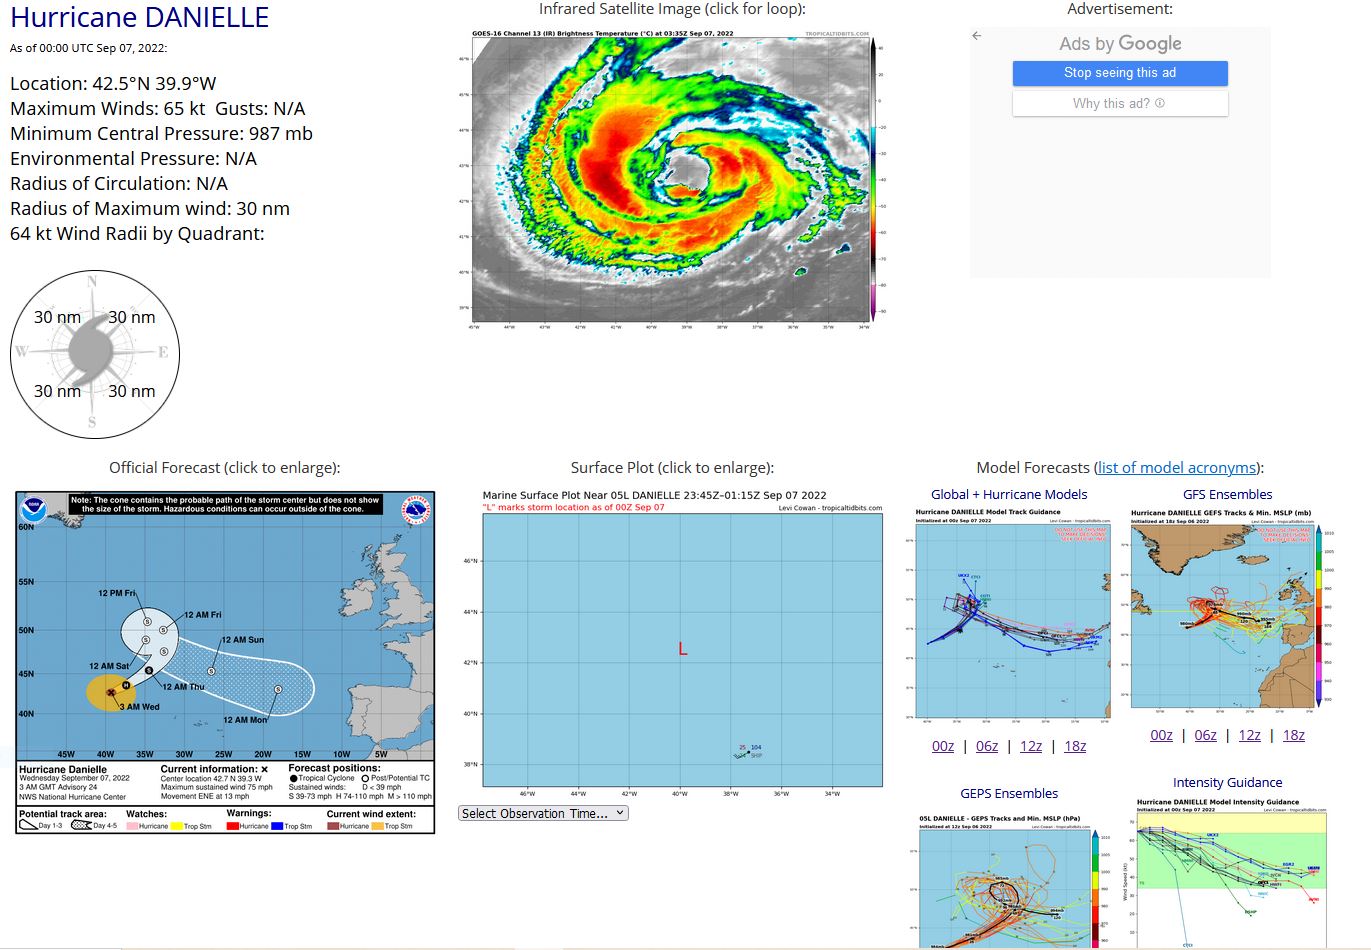 000 WTNT45 KNHC 070233 TCDAT5  Hurricane Danielle Discussion Number  24 NWS National Hurricane Center Miami FL       AL052022 300 AM GMT Wed Sep 07 2022  This morning's conventional satellite presentation indicates little change in Danielle's cloud pattern since yesterday morning. However, a recent SSMI/S microwave image shows a subtle vertical tilt toward the east.  The initial intensity is held at 65 kt for  this advisory and is based on a blend of the subjective and AiDT  objective satellite intensity estimates and an earlier STAR SAR/S1  surface wind retrieval that indicated winds of 70 kt.    Danielle should remain over marginally warm waters for the next  12-18 hours. Subsequently, little change in strength is expected  during that time.  By early Thursday, Danielle will move over a  sharp surface temperature gradient of 22C or less.  This negative  oceanic contribution, combined with the loss of dynamic forcing  after the cyclone merges with the approaching baroclinic system,  should induce a slow weakening trend through the end of the period.  Danielle's initial motion is estimated to be east-northeastward, or 060/11 kt.  There is no significant change to the NHC forecast philosophy.  Danielle should continue accelerating in response to a  vigorous baroclinic system approaching from the northwest Atlantic  east of the Newfoundland coast.  Danielle is forecast to interact  with the system mentioned above late Thursday night.  On Friday, the  two systems are predicted to merge and become a larger and strong  extratropical low with asymmetric deep warm core characteristics  typical of warm seclusions.  Over the weekend, the large  post-tropical low is expected to turn east-southeastward and  maintain this general motion through early next week.  Danielle is producing a vast area of very rough seas over the central-north Atlantic. More information can be found in the High Seas Forecasts issued by the Ocean Prediction Center under AWIPS header NFDHSFAT1, WMO header FZNT01 KWBC, and online at ocean.weather.gov/shtml/NFDHSFAT1.php. The UK Met Office also has information in High Seas Forecasts for the west Central and east Central sections issued under WMO header FQNT21 EGRR and on the web at metoffice.gov.uk/weather/specialist-forecasts/coast-and-sea/high- seas-forecast   FORECAST POSITIONS AND MAX WINDS  INIT  07/0300Z 42.7N  39.3W   65 KT  75 MPH  12H  07/1200Z 43.6N  37.4W   65 KT  75 MPH  24H  08/0000Z 45.4N  34.5W   60 KT  70 MPH  36H  08/1200Z 47.6N  32.6W   55 KT  65 MPH...POST-TROP/EXTRATROP  48H  09/0000Z 50.0N  32.7W   55 KT  65 MPH...POST-TROP/EXTRATROP  60H  09/1200Z 50.9N  34.7W   50 KT  60 MPH...POST-TROP/EXTRATROP  72H  10/0000Z 48.9N  34.9W   45 KT  50 MPH...POST-TROP/EXTRATROP  96H  11/0000Z 45.3N  26.6W   40 KT  45 MPH...POST-TROP/EXTRATROP 120H  12/0000Z 43.1N  18.1W   35 KT  40 MPH...POST-TROP/EXTRATROP  $$ Forecaster Roberts